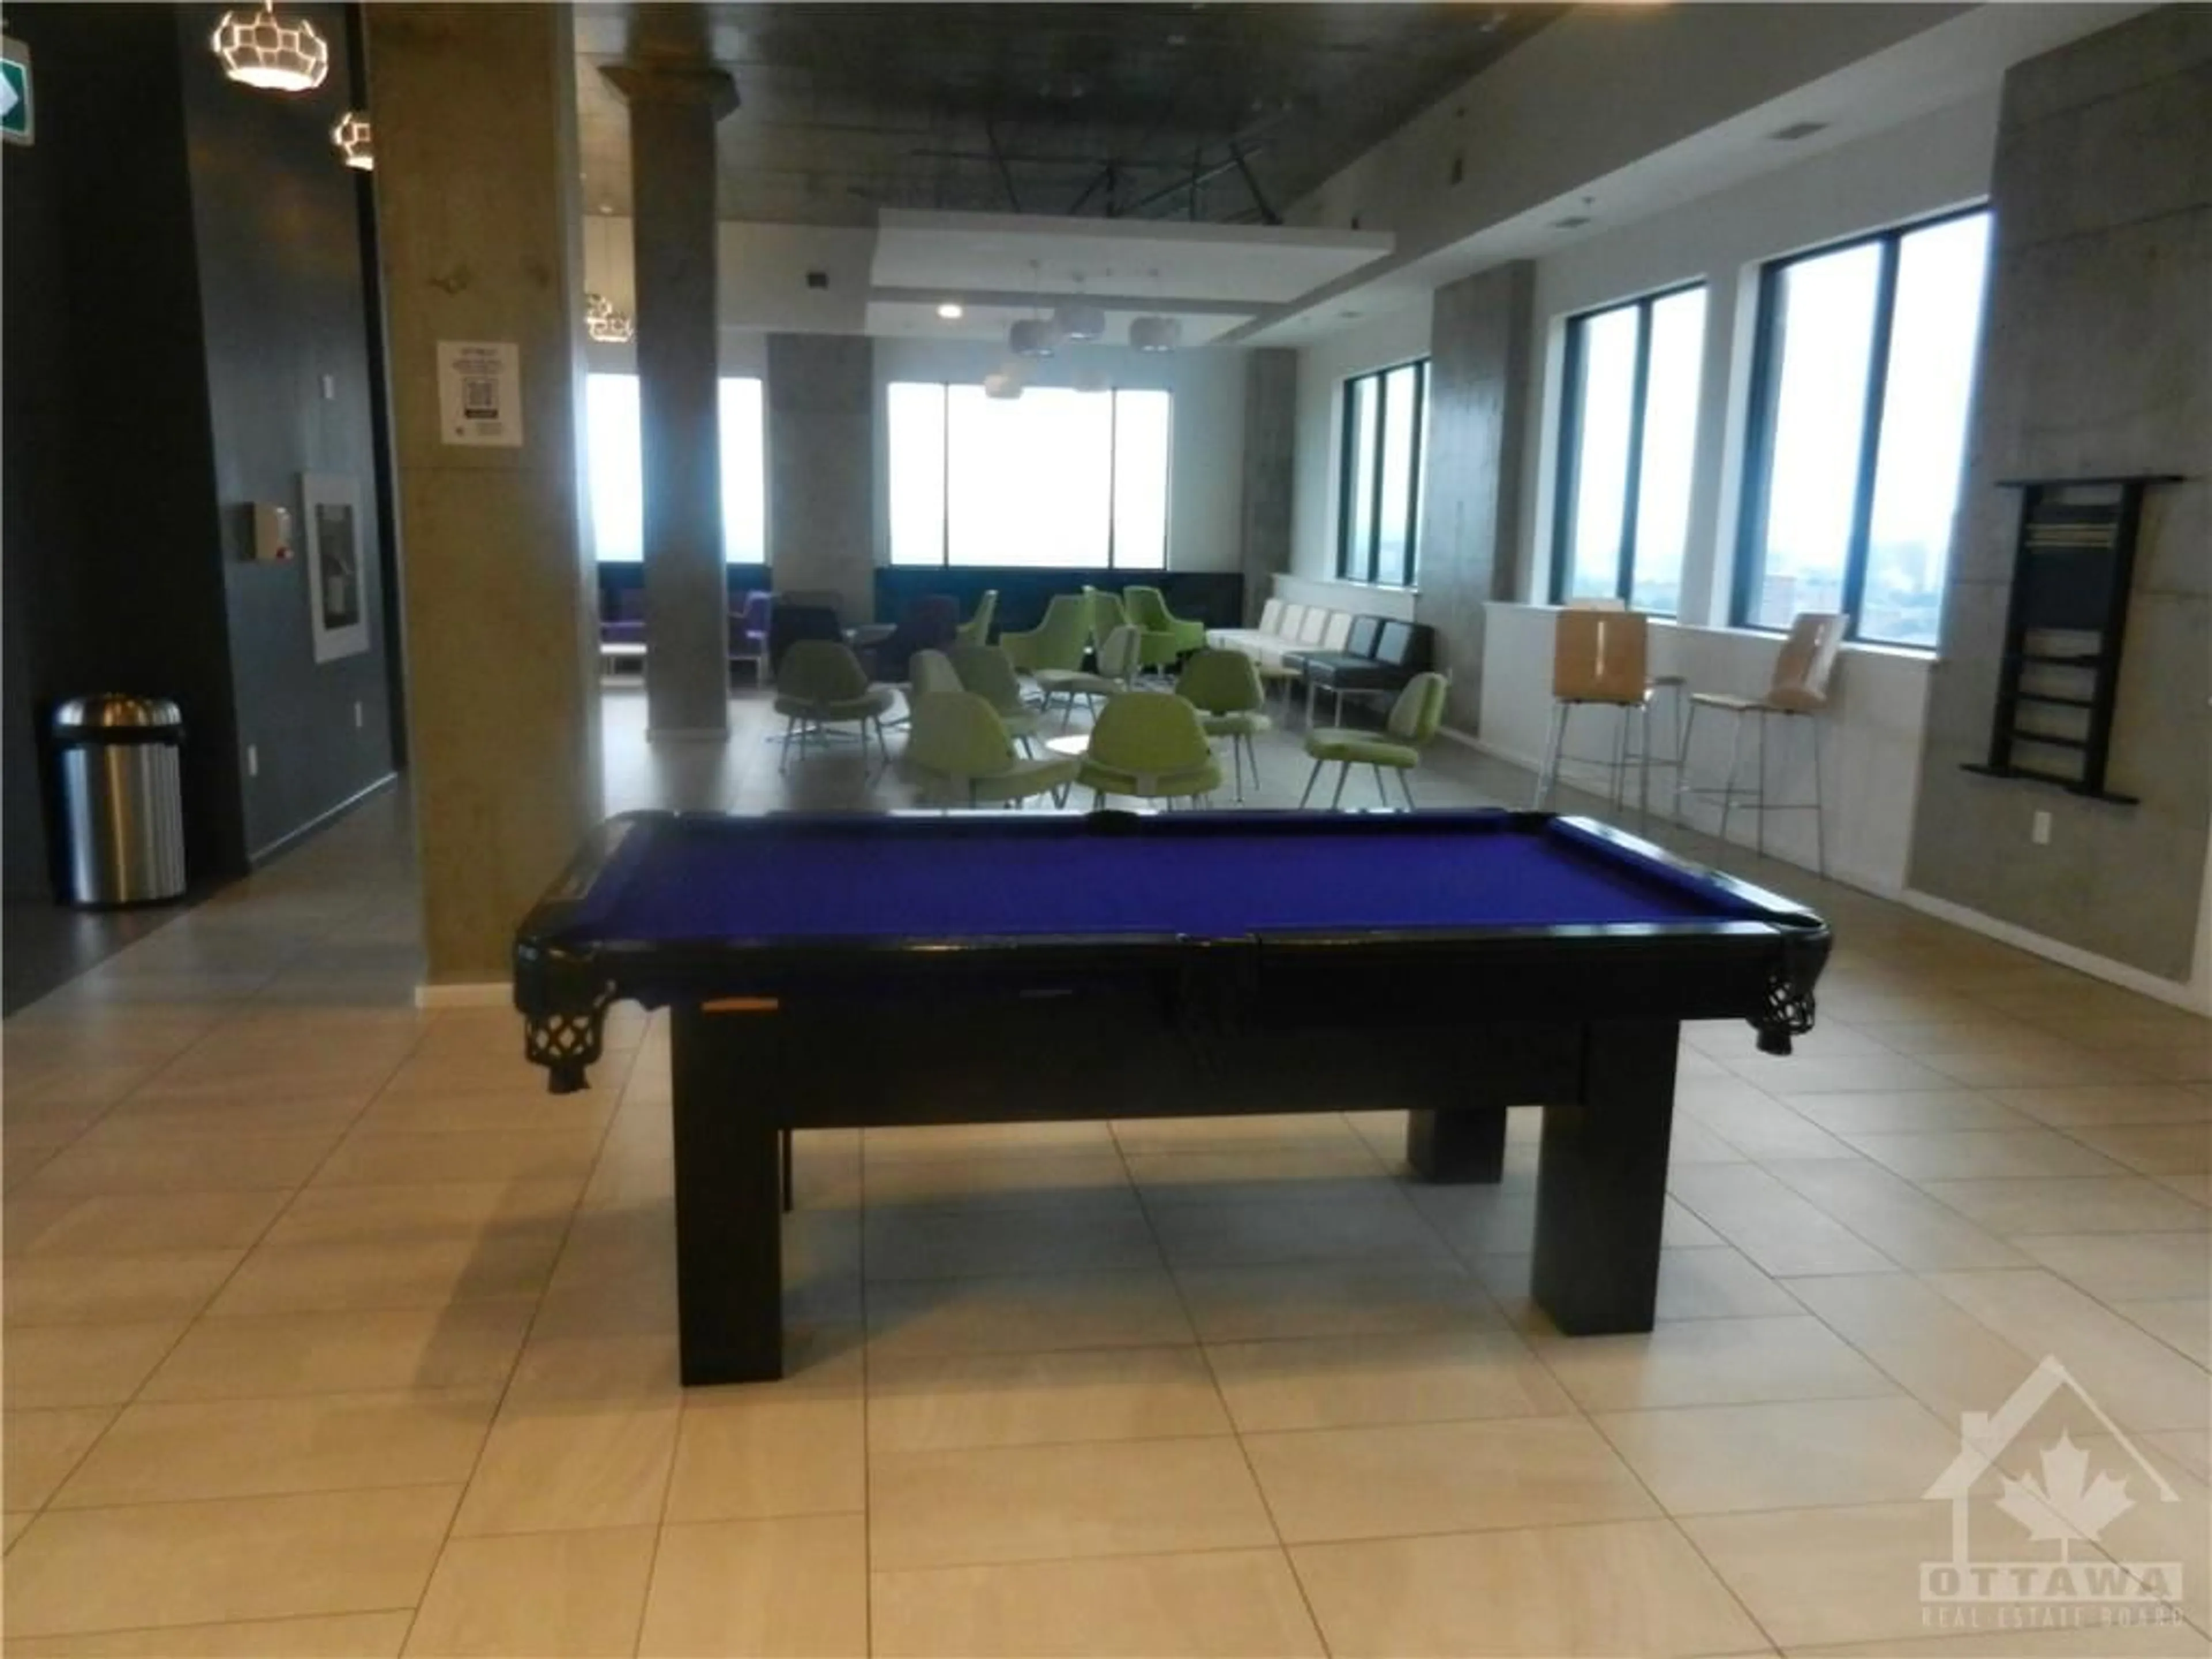 Other indoor space for 105 CHAMPAGNE Ave #1706, Ottawa Ontario K1S 4P3